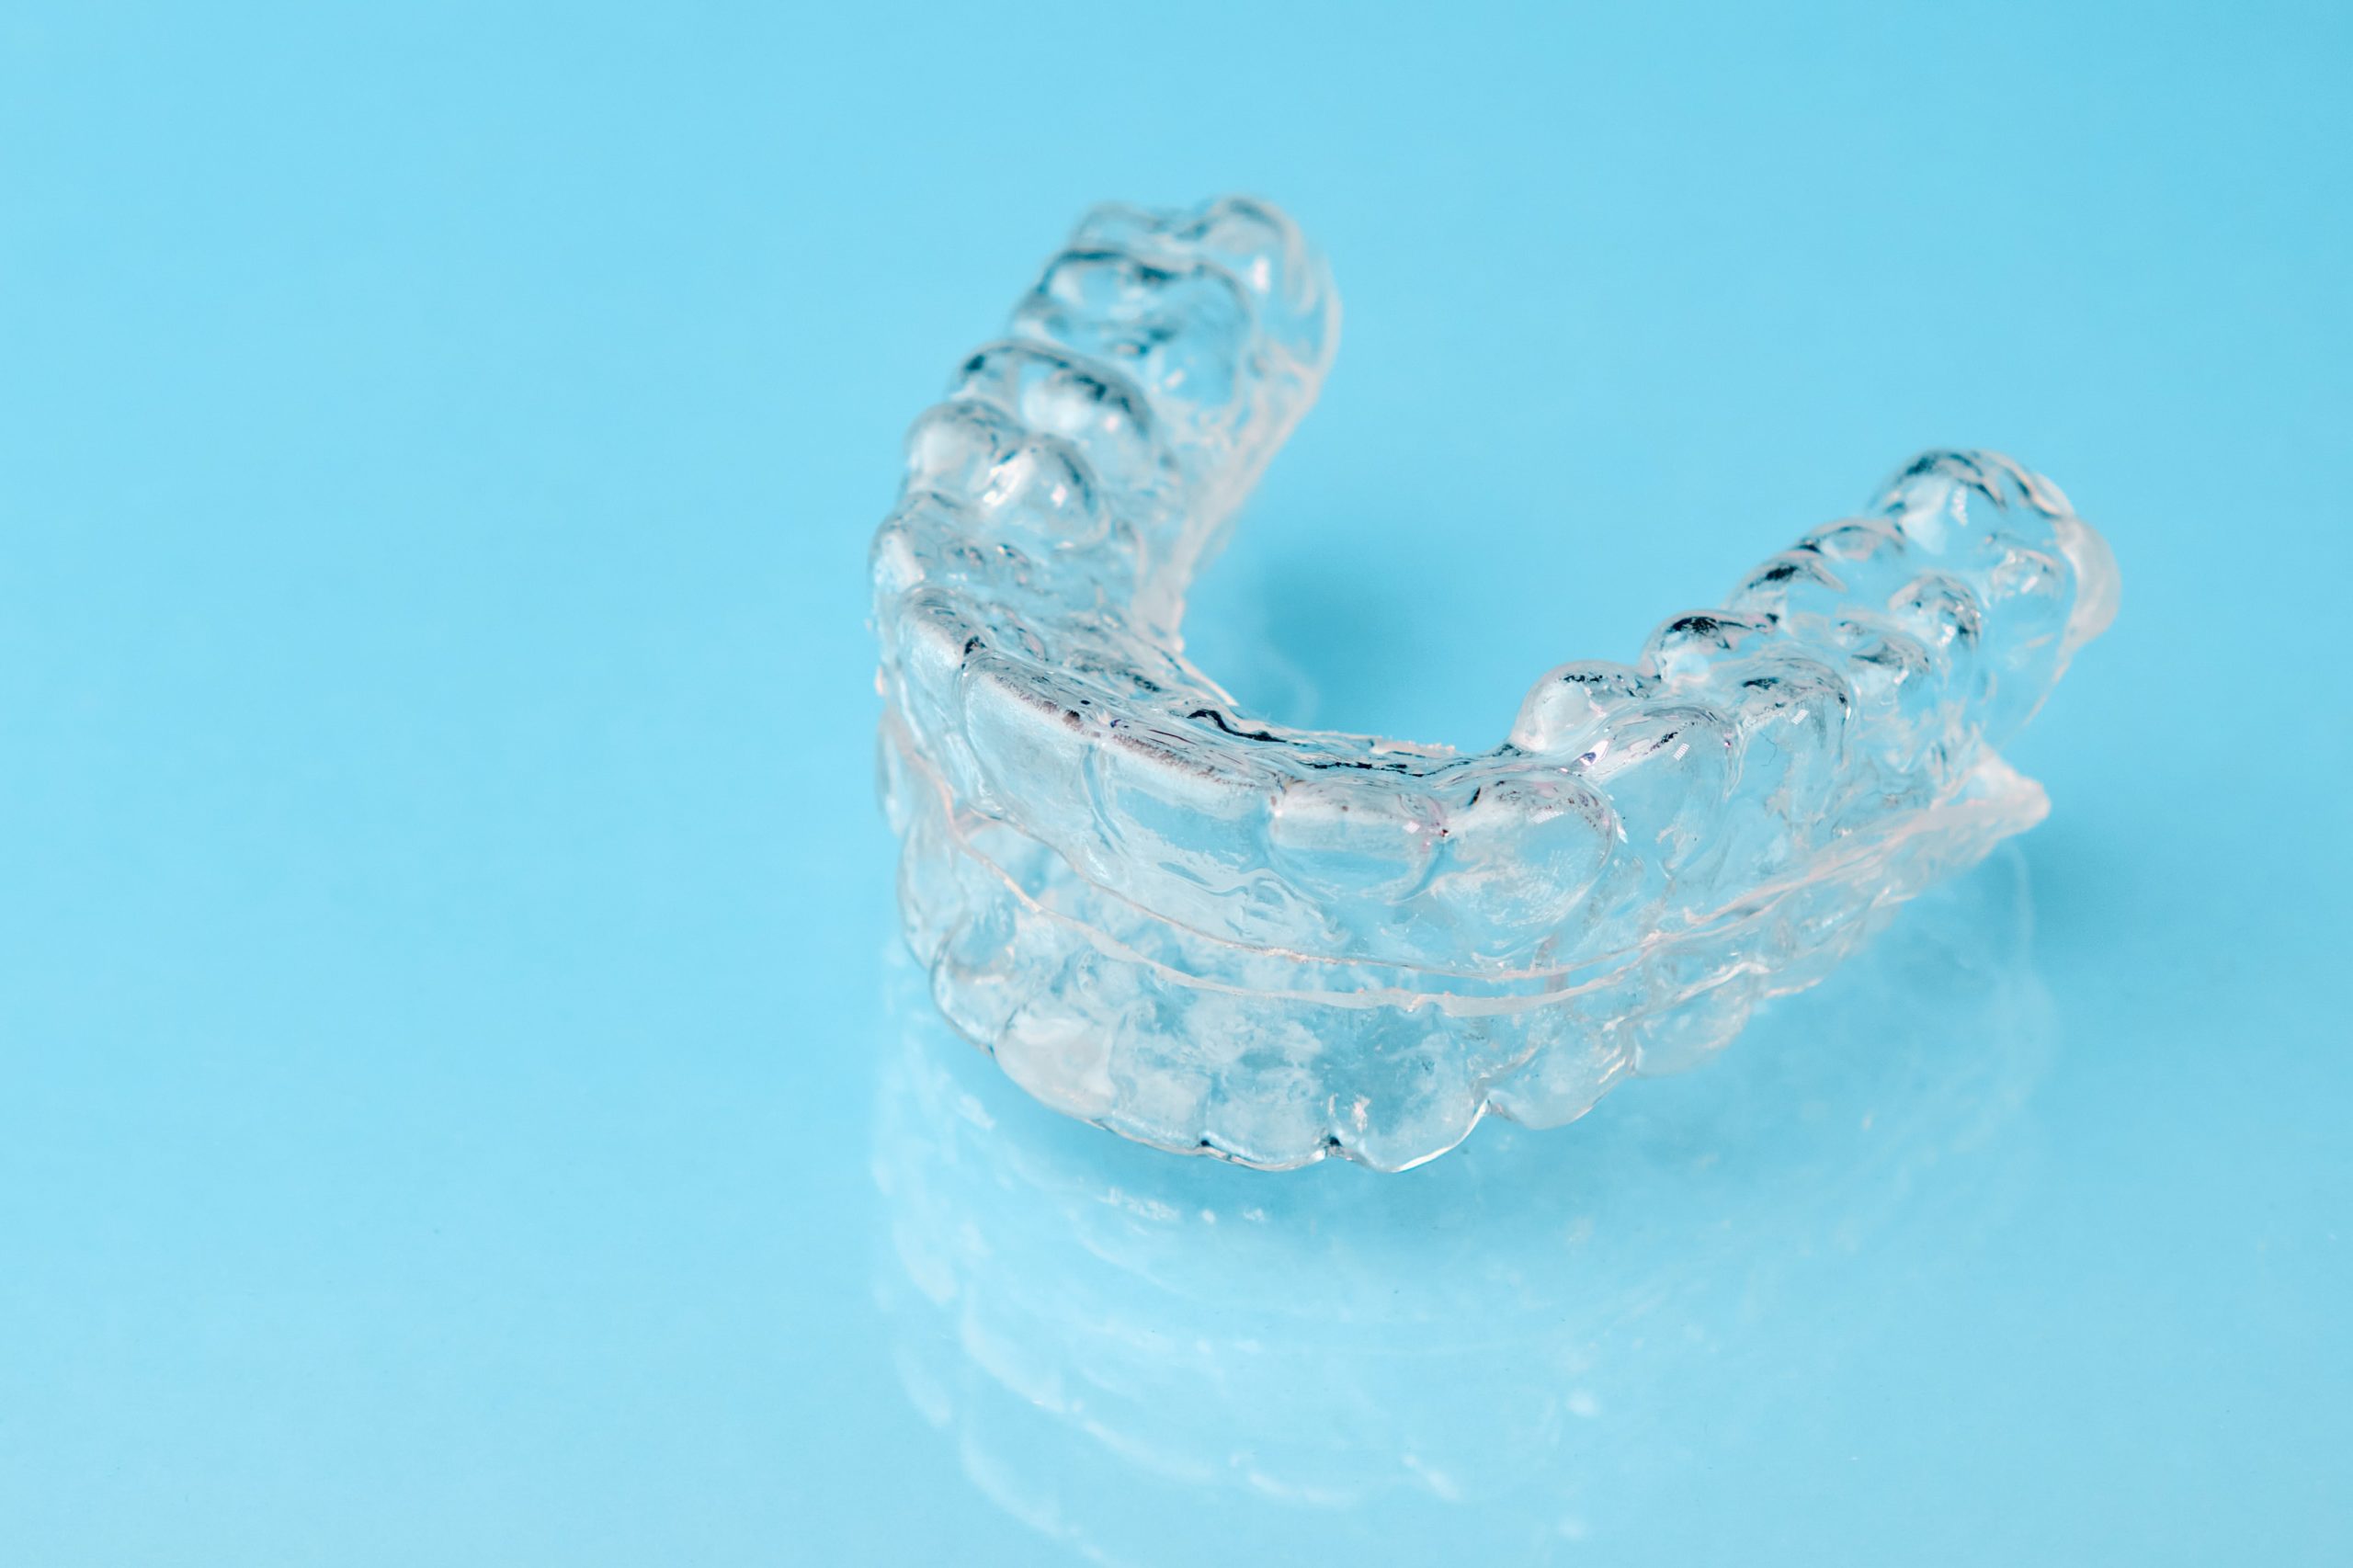 Clear Aligner on Blue Dental Countertop - The Super Dentists